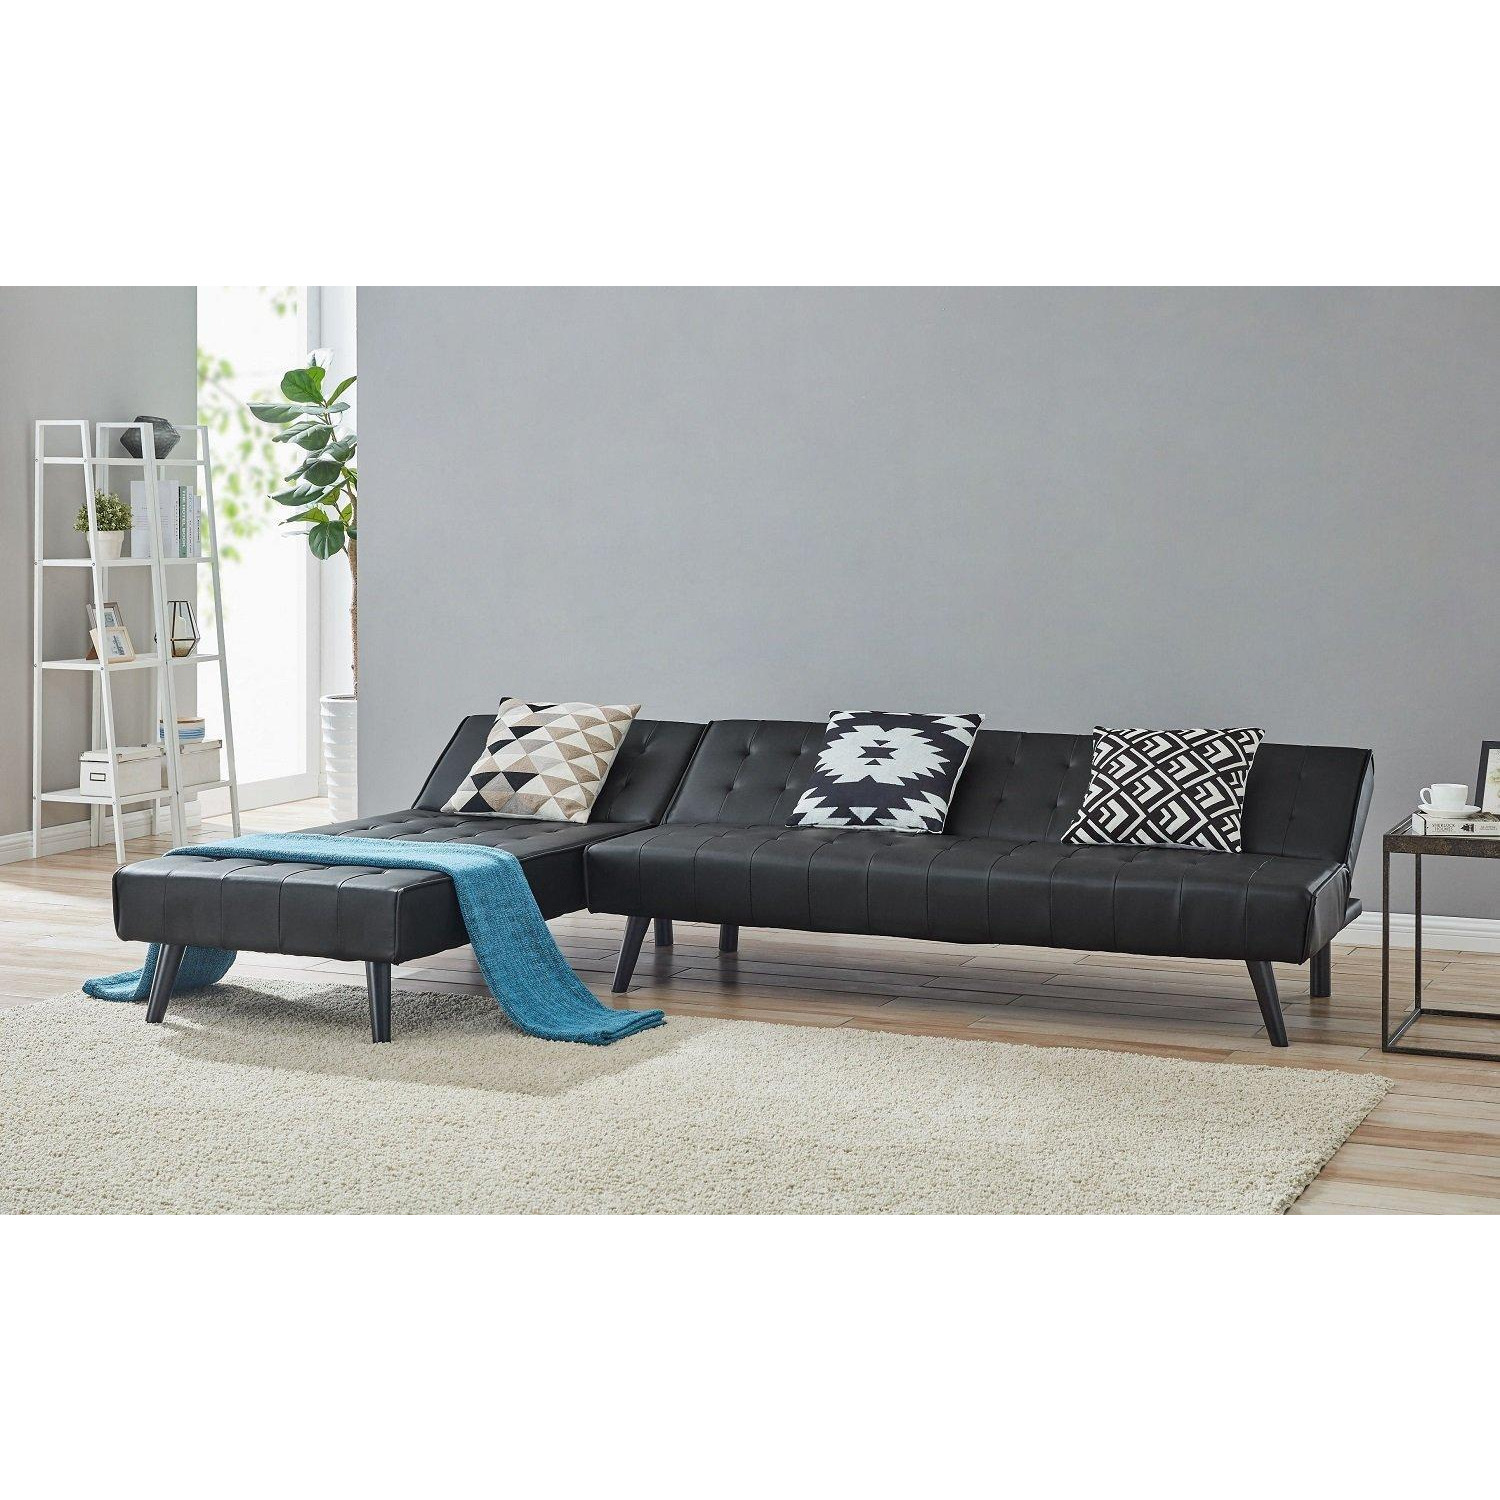 Dawson L-Shaped Faux Leather Sofa Bed With Tufted Detail and Chaise Section and Black Legs - image 1